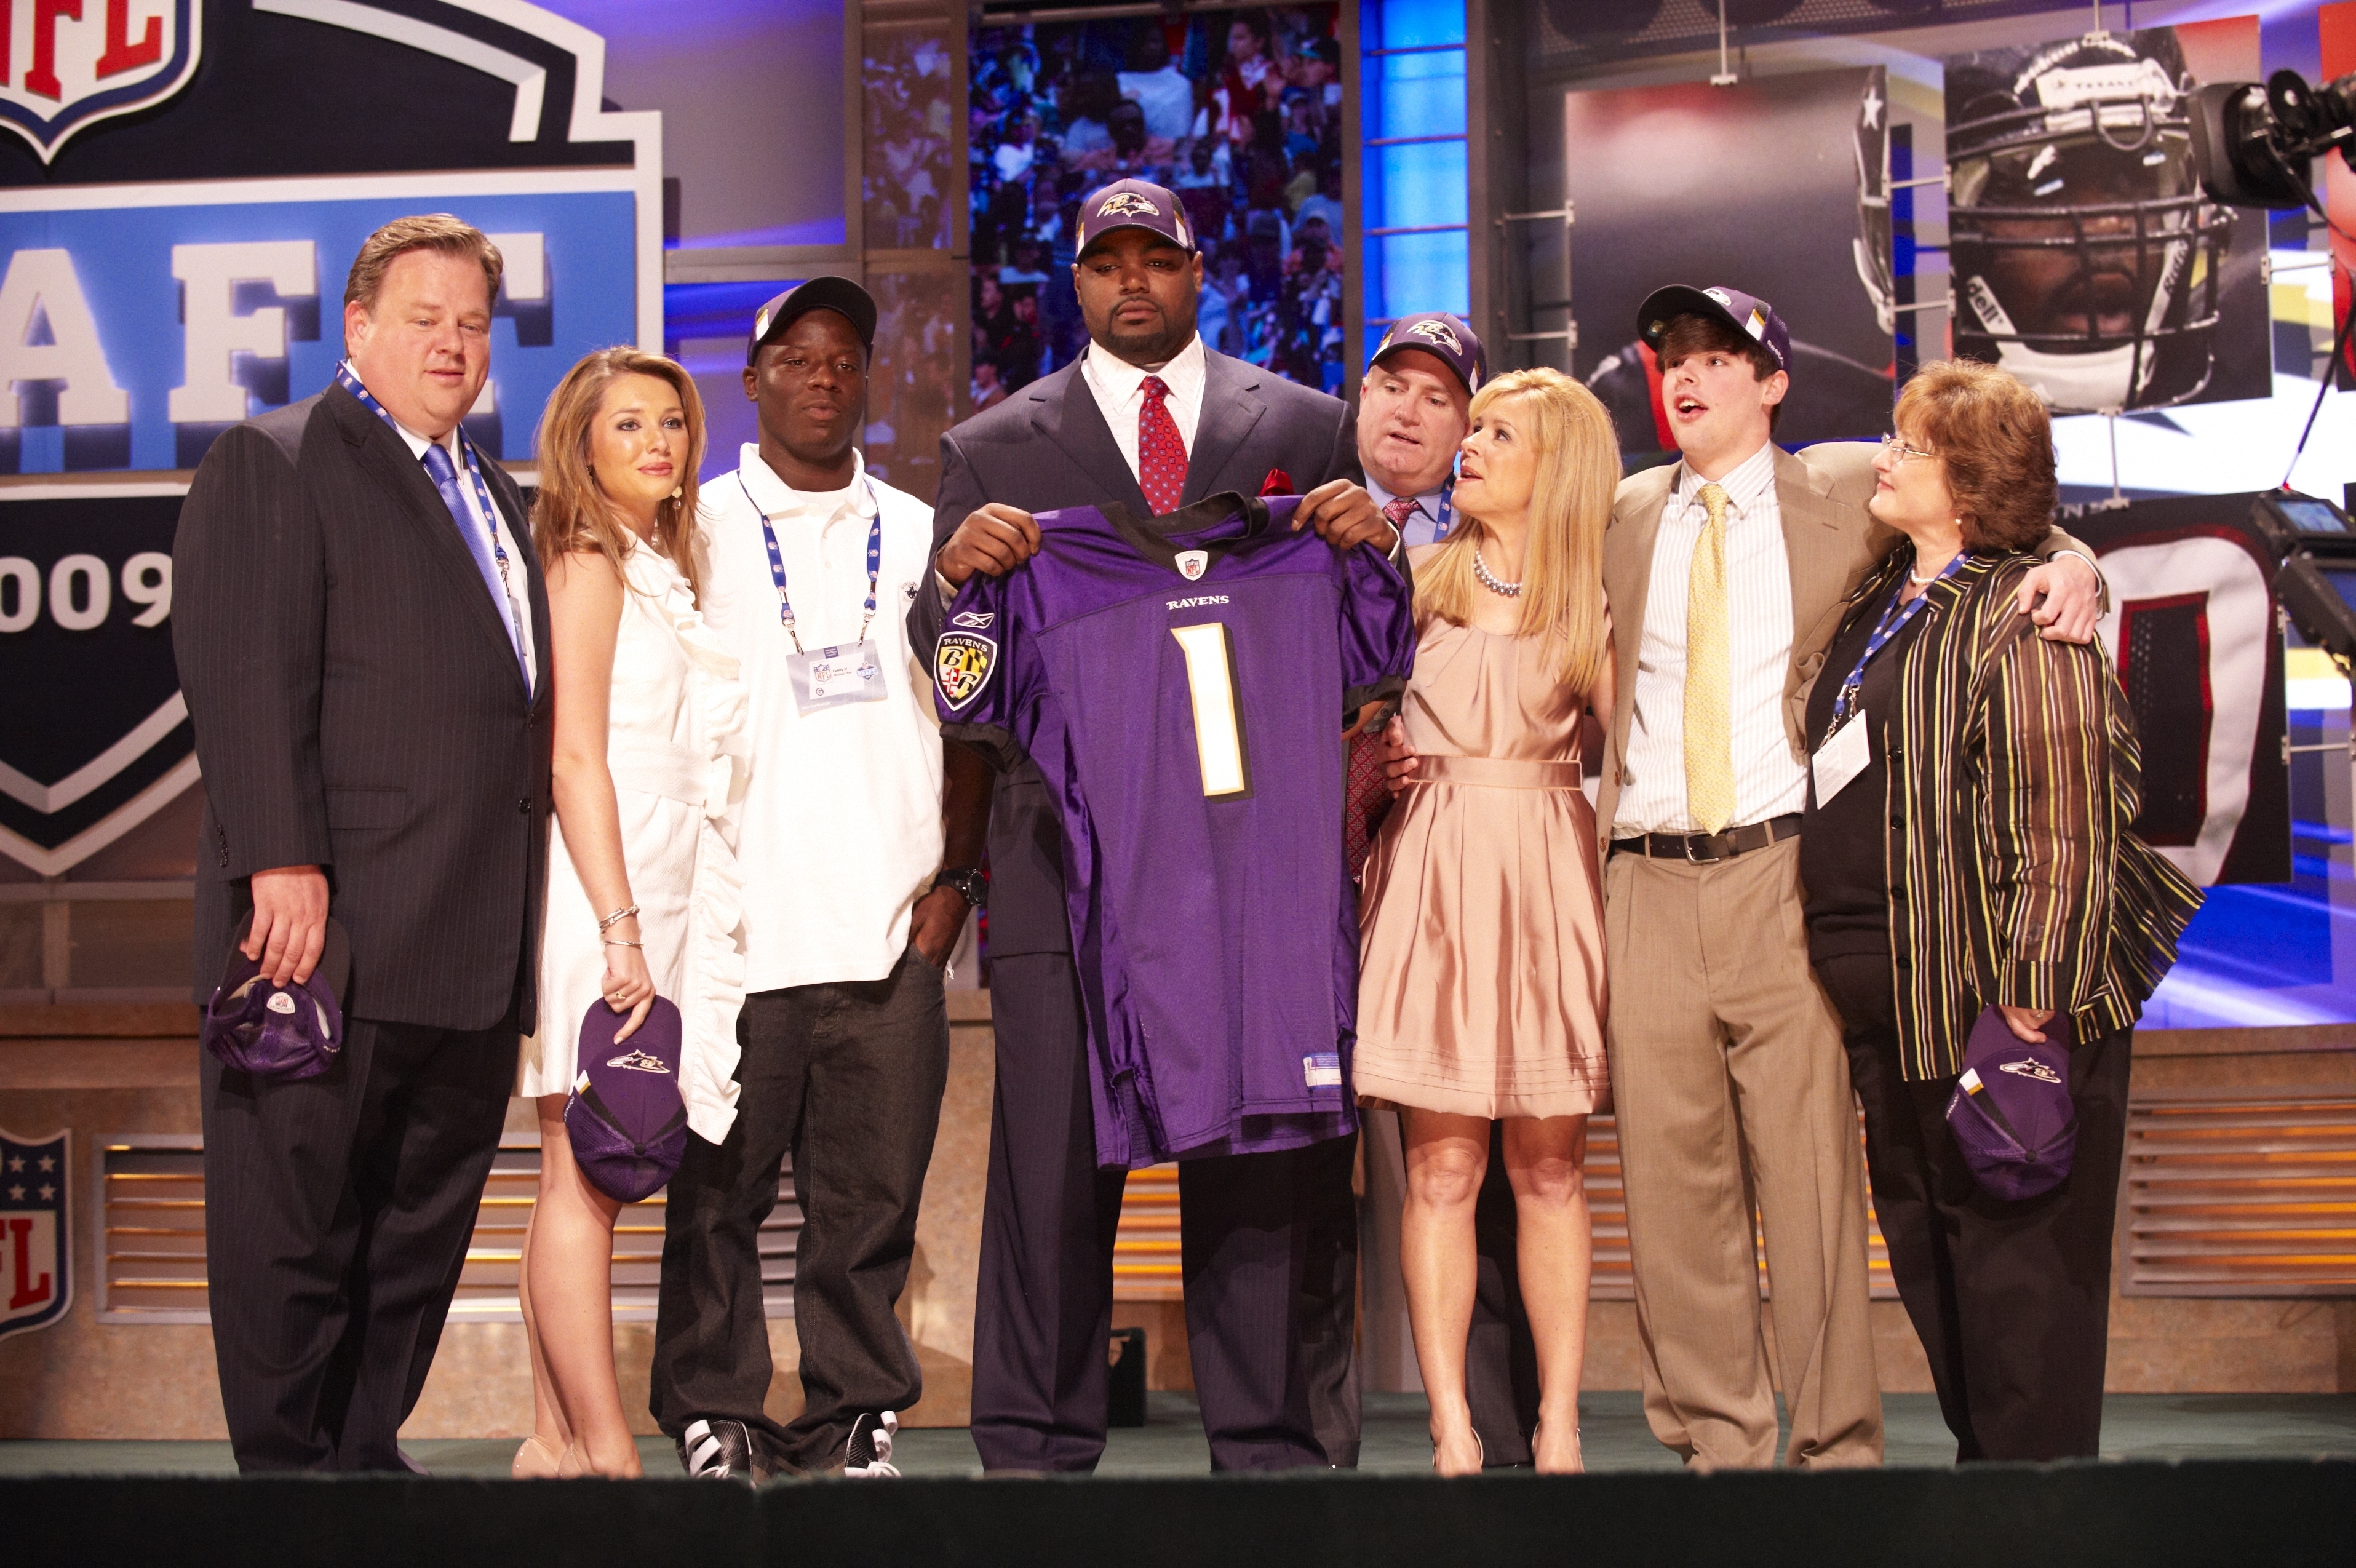 Michael and the Tuohys at the NFL draft